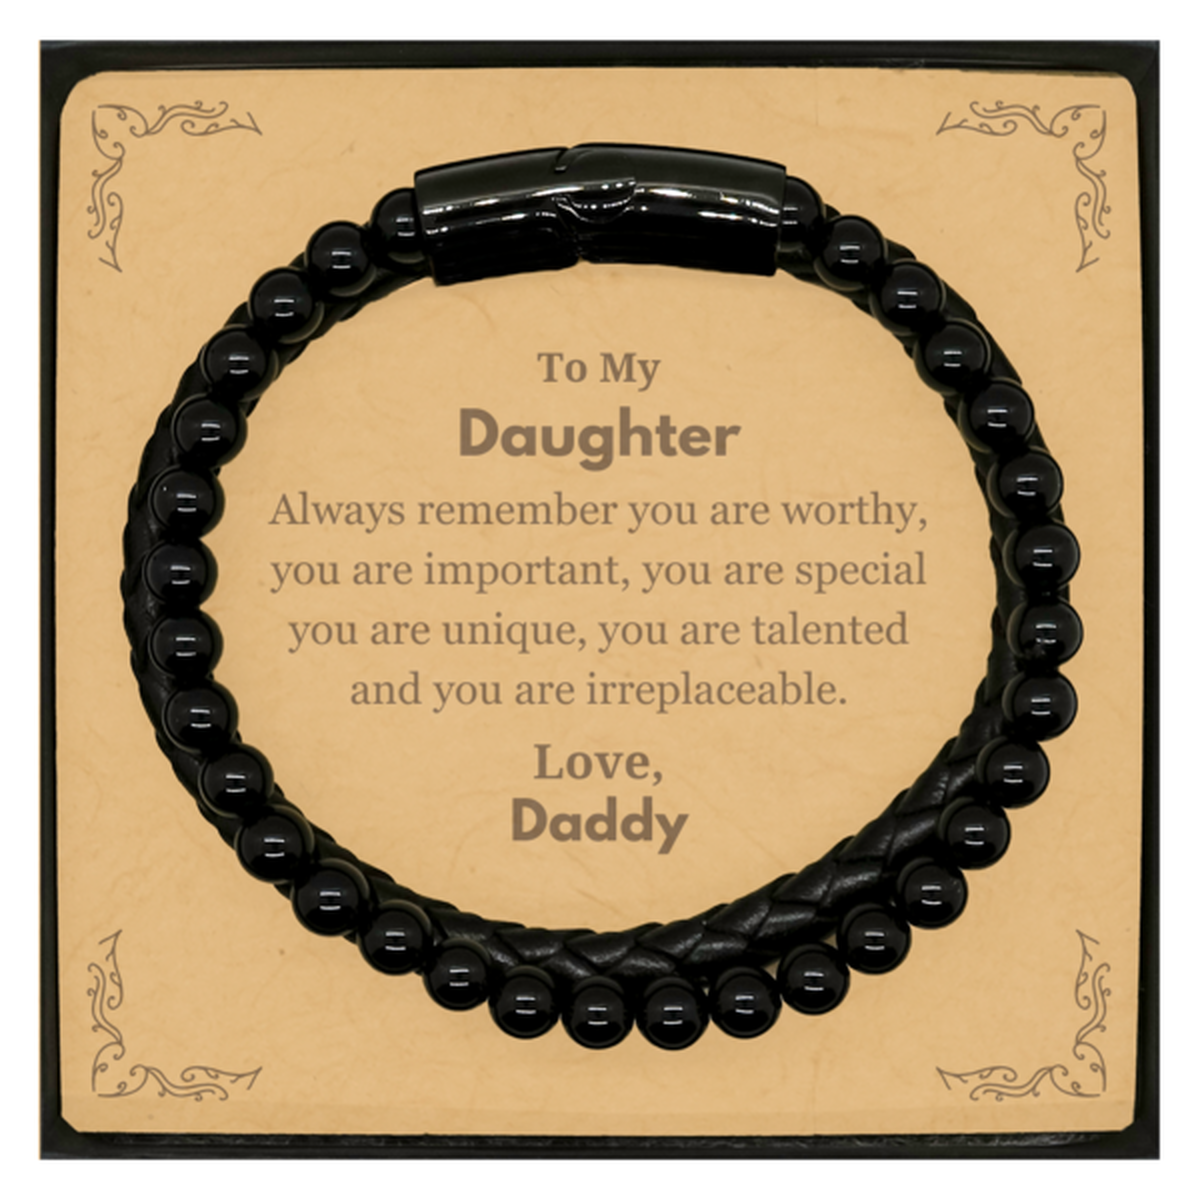 Daughter Birthday Gifts from Daddy, Inspirational Stone Leather Bracelets for Daughter Christmas Graduation Gifts for Daughter Always remember you are worthy, you are important. Love, Daddy